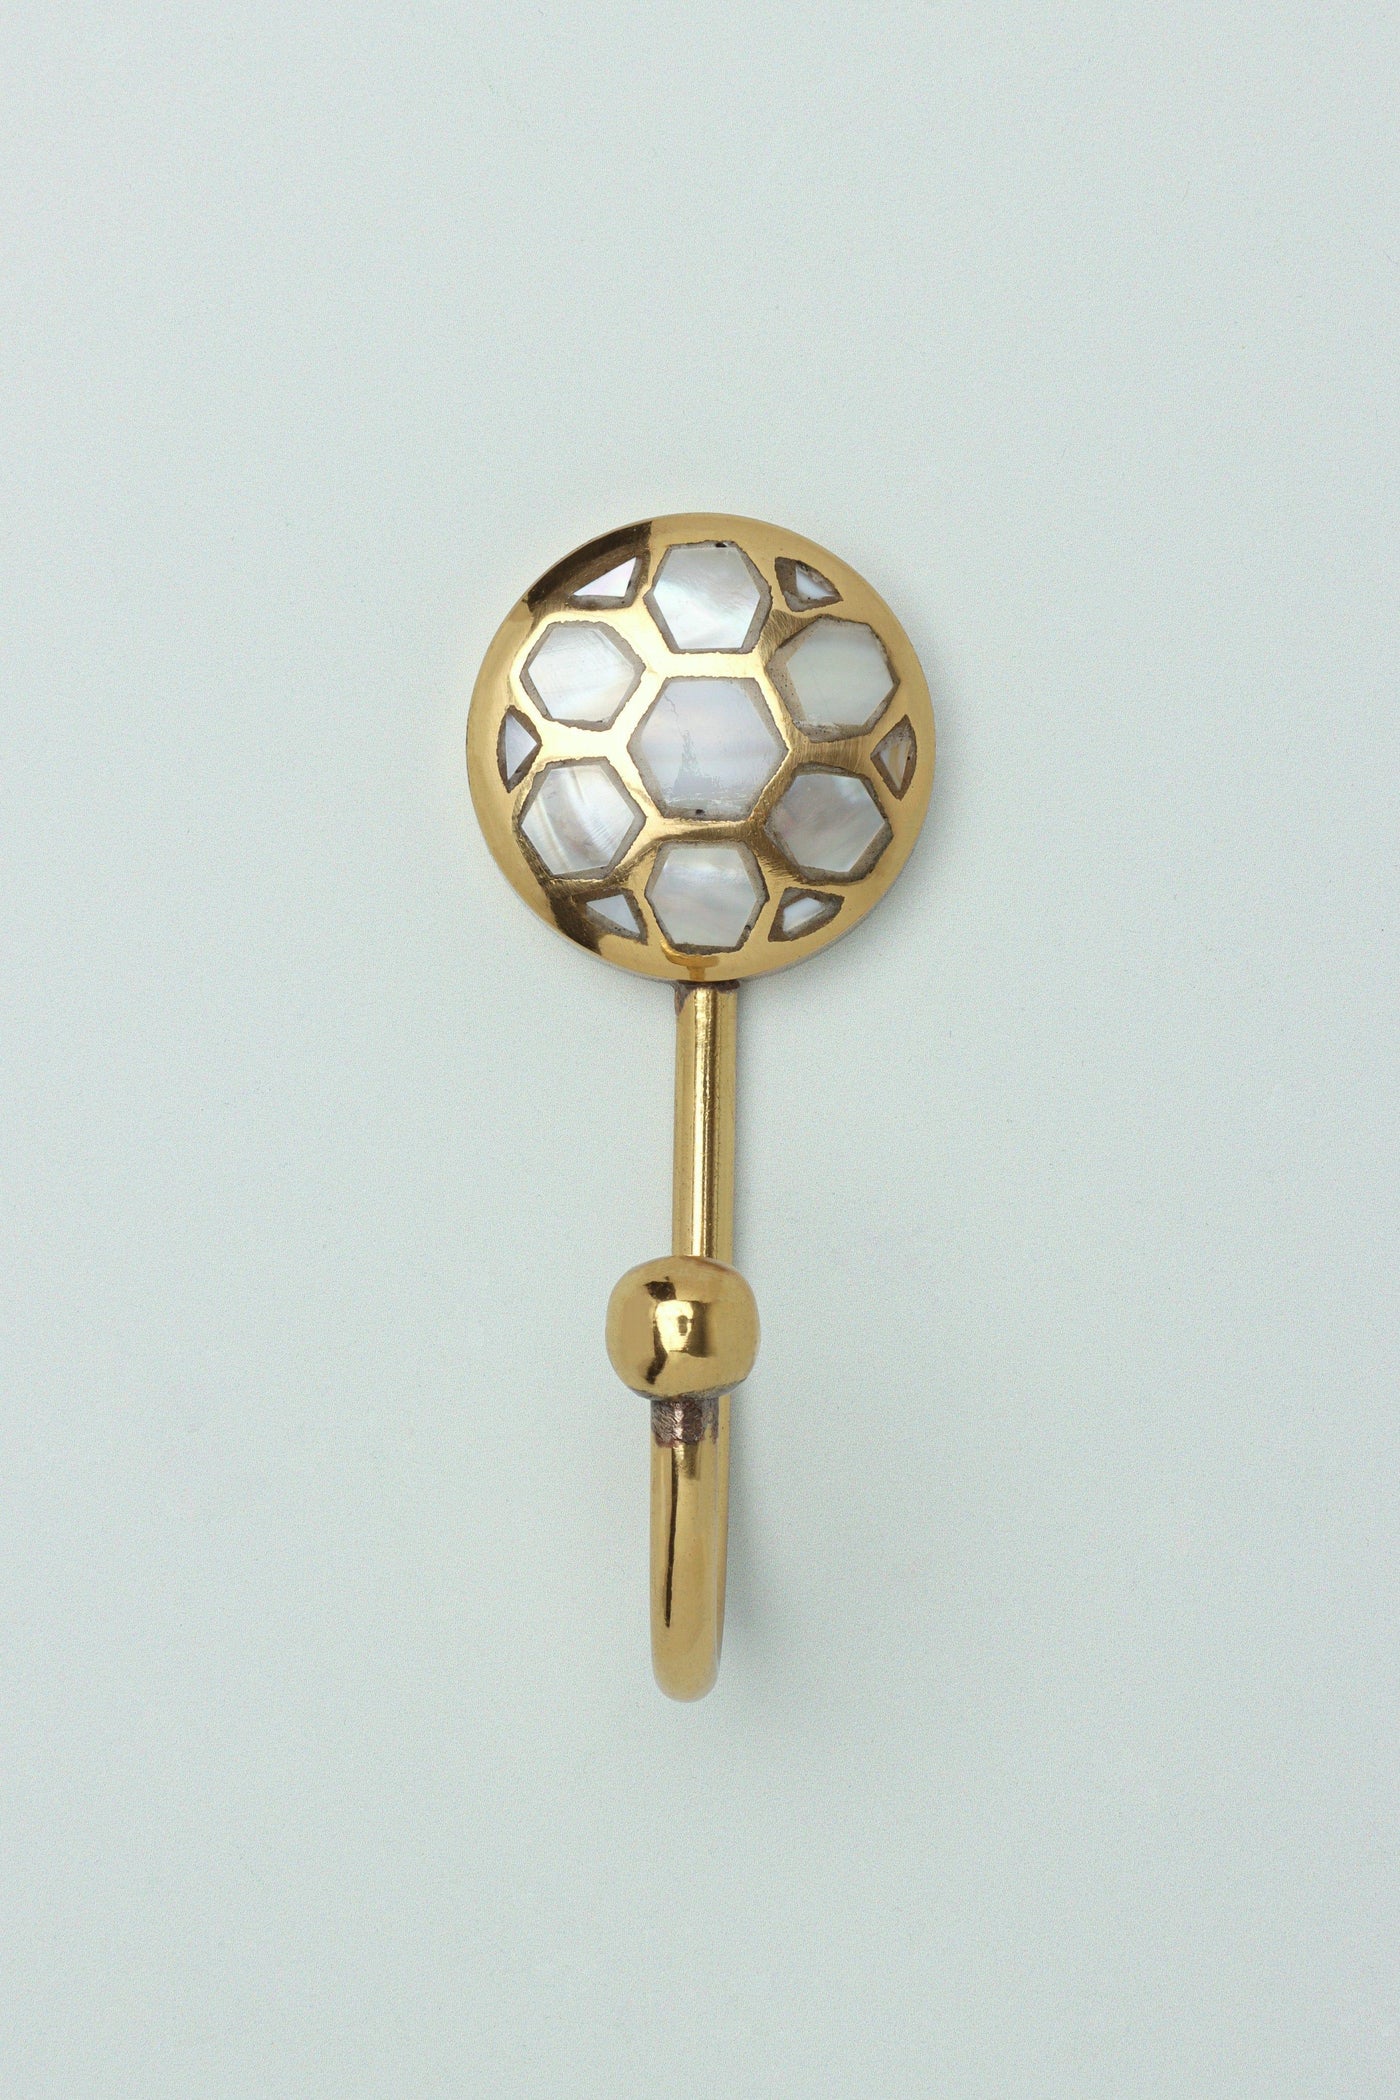 G Decor All Hooks Hexagon / Pearl Gold Mother Of Pearl Patterned Gold Brass Coat Hook